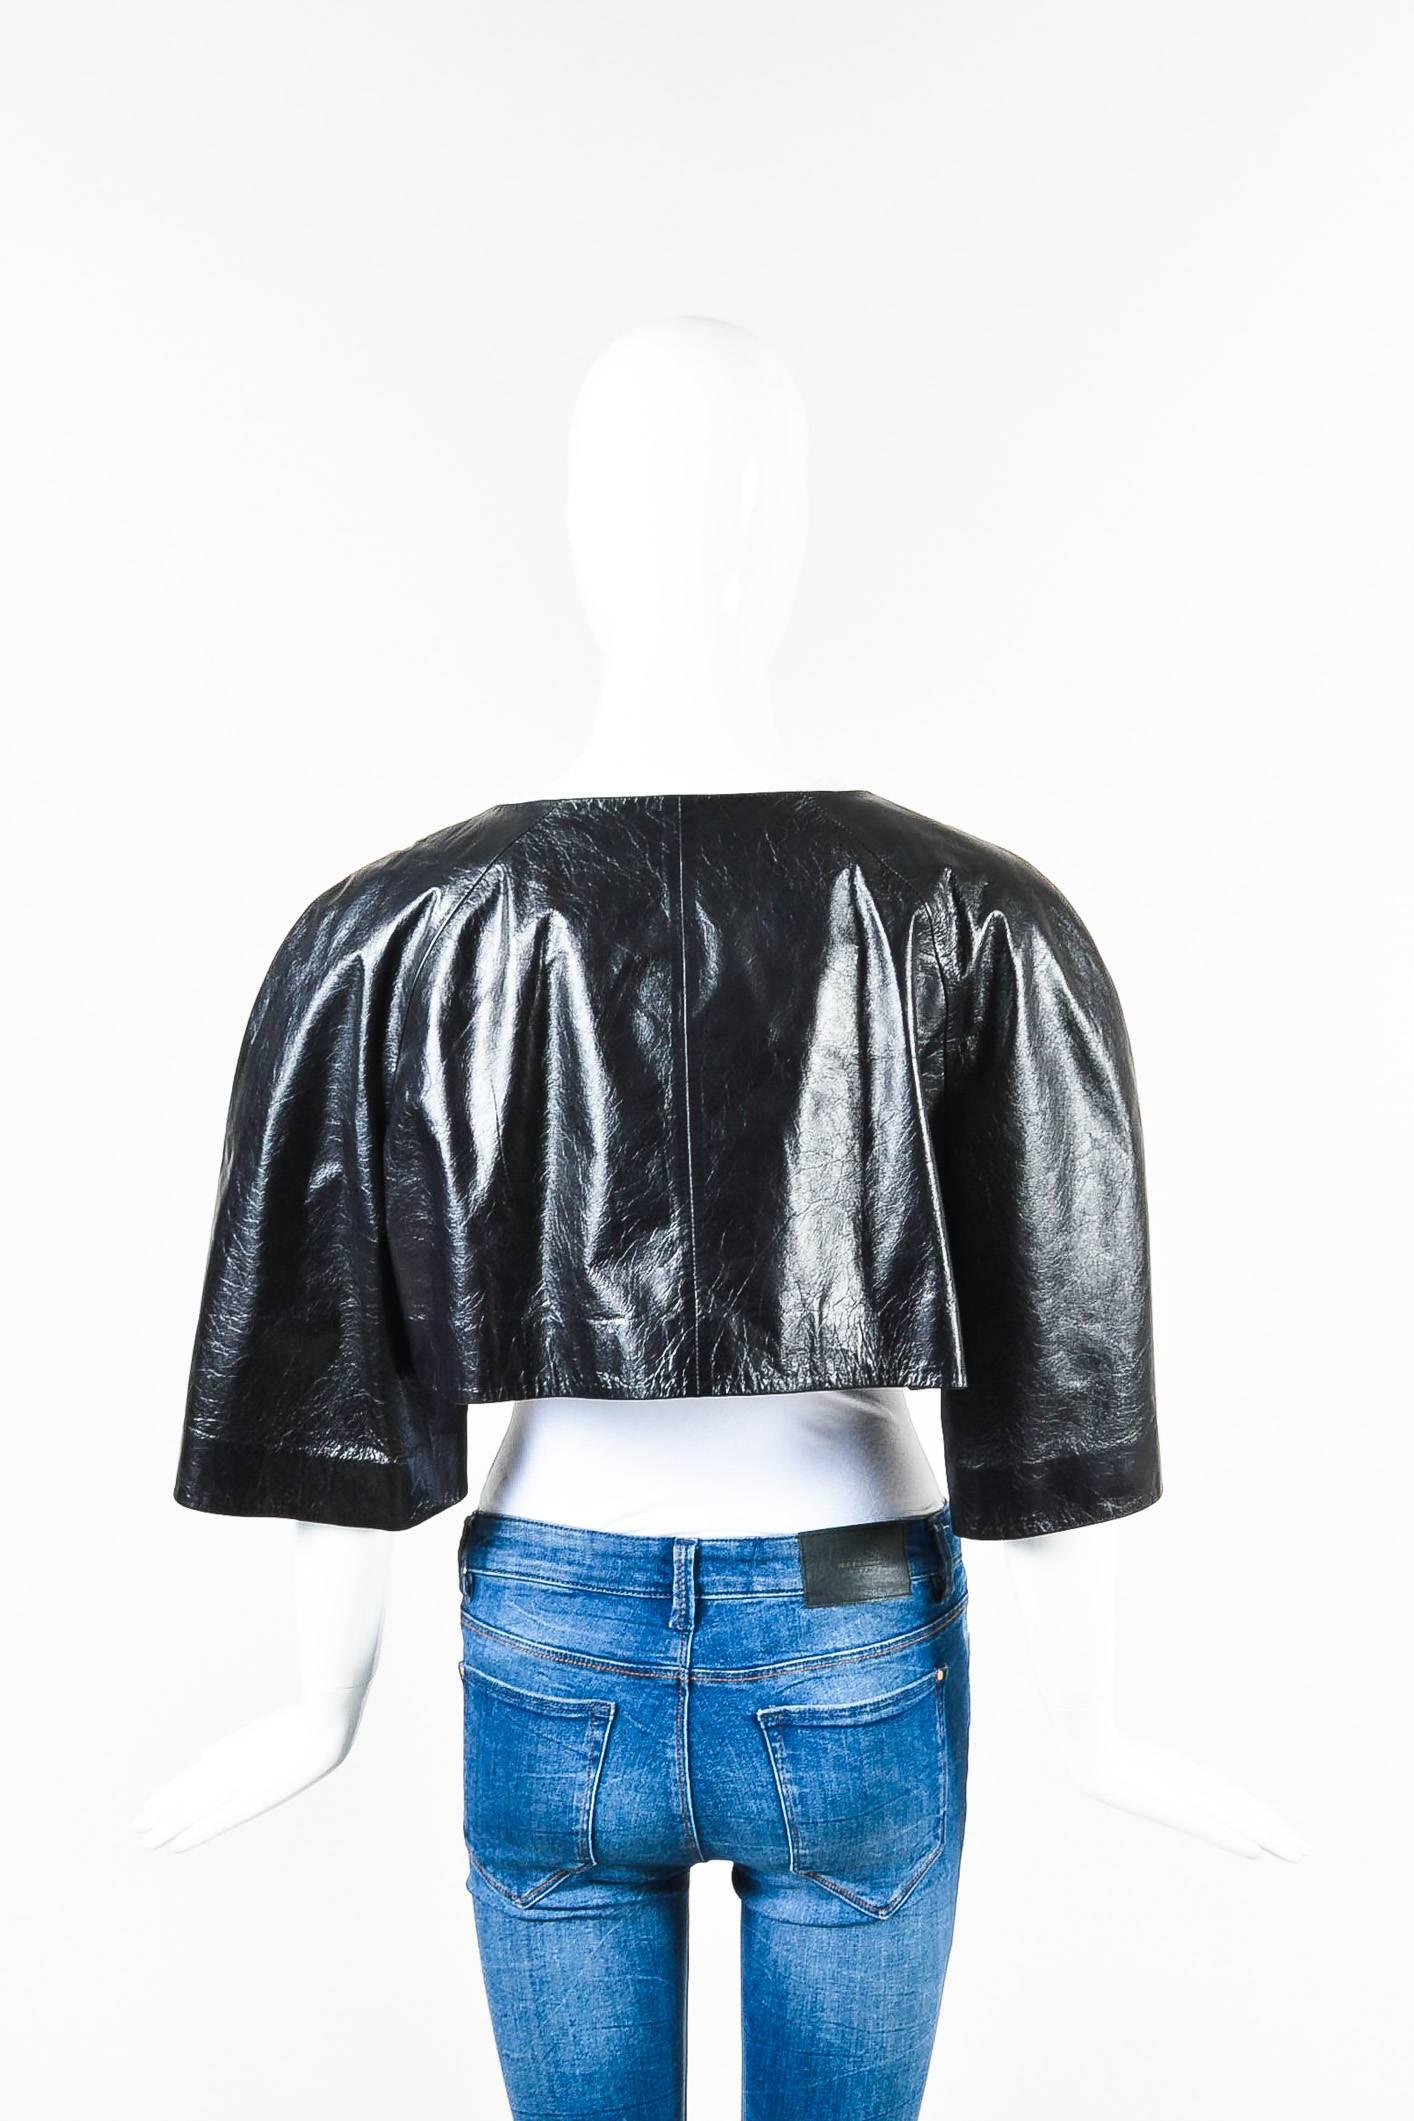 Black leather cropped three quarter sleeve jacket from Chanel. Pearl buttons with 'CC' printed logo down the front for closure. Lined. Comes with a fabric swatch and an extra button.

Condition details: Pre-owned. Heavy wrinkling and minor wear